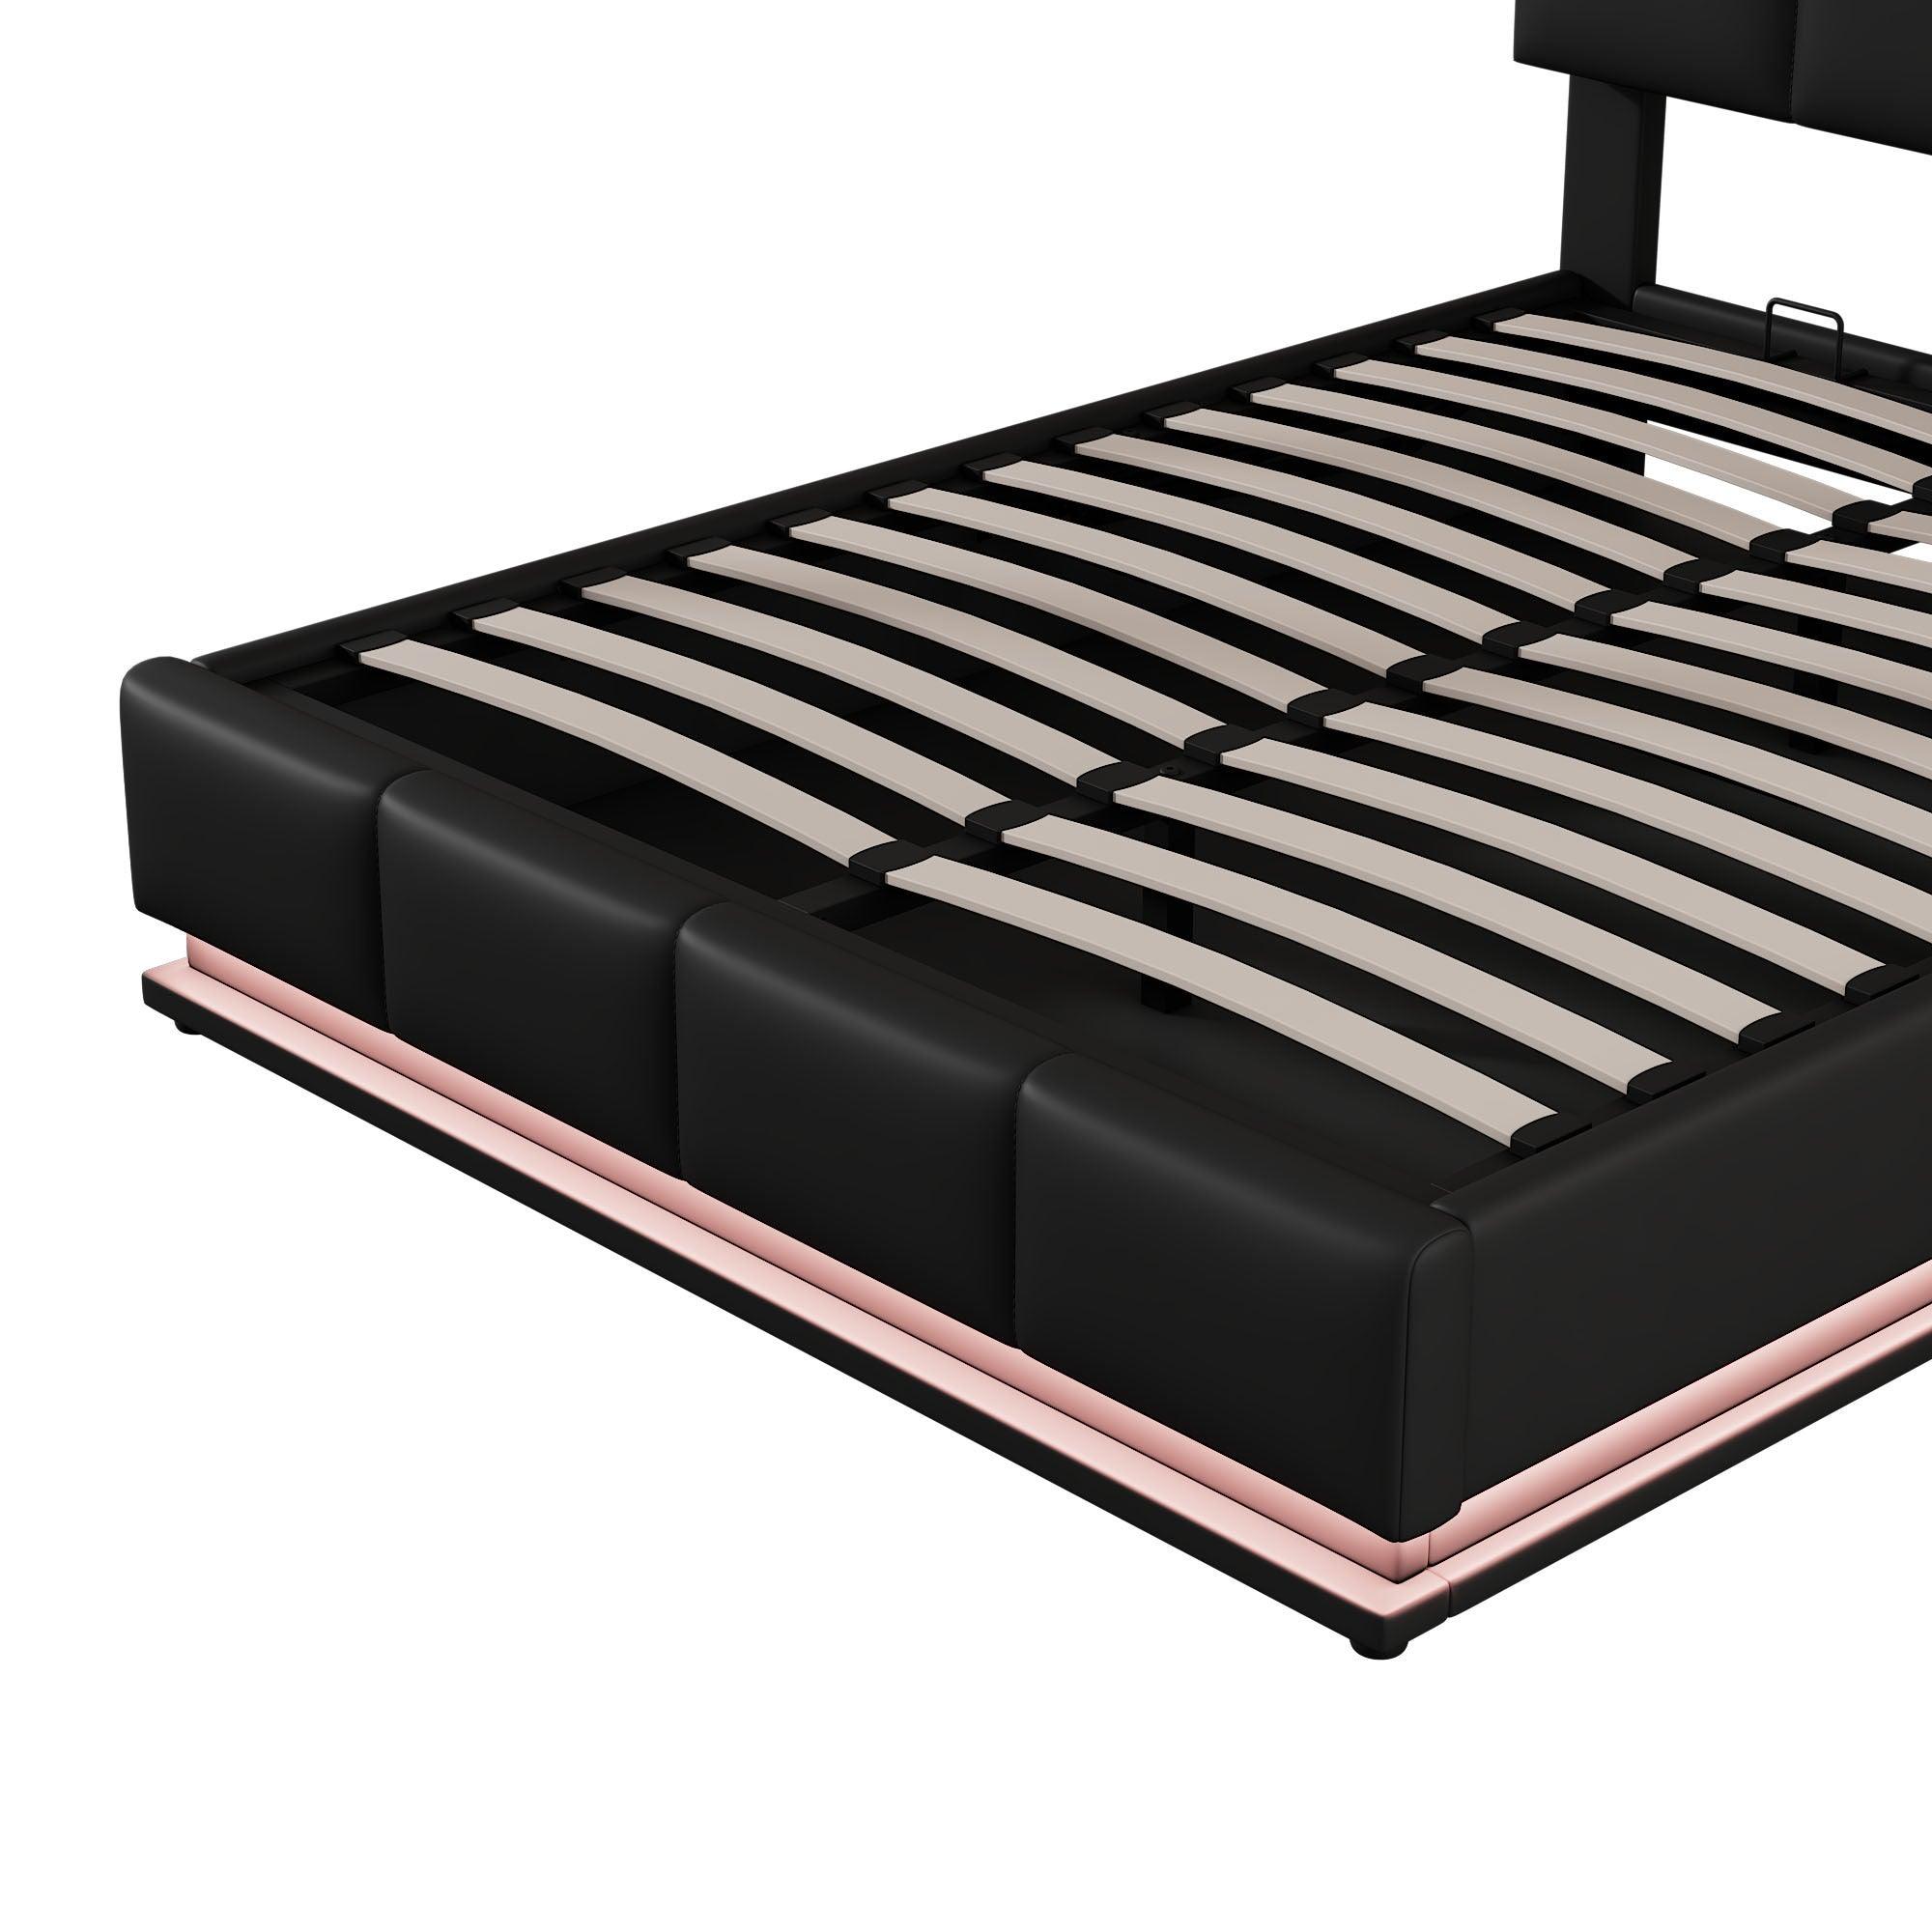 Full Size Tufted Upholstered Platform Bed with Hydraulic Storage System, PU Storage Bed with LED Lights and USB charger, Black